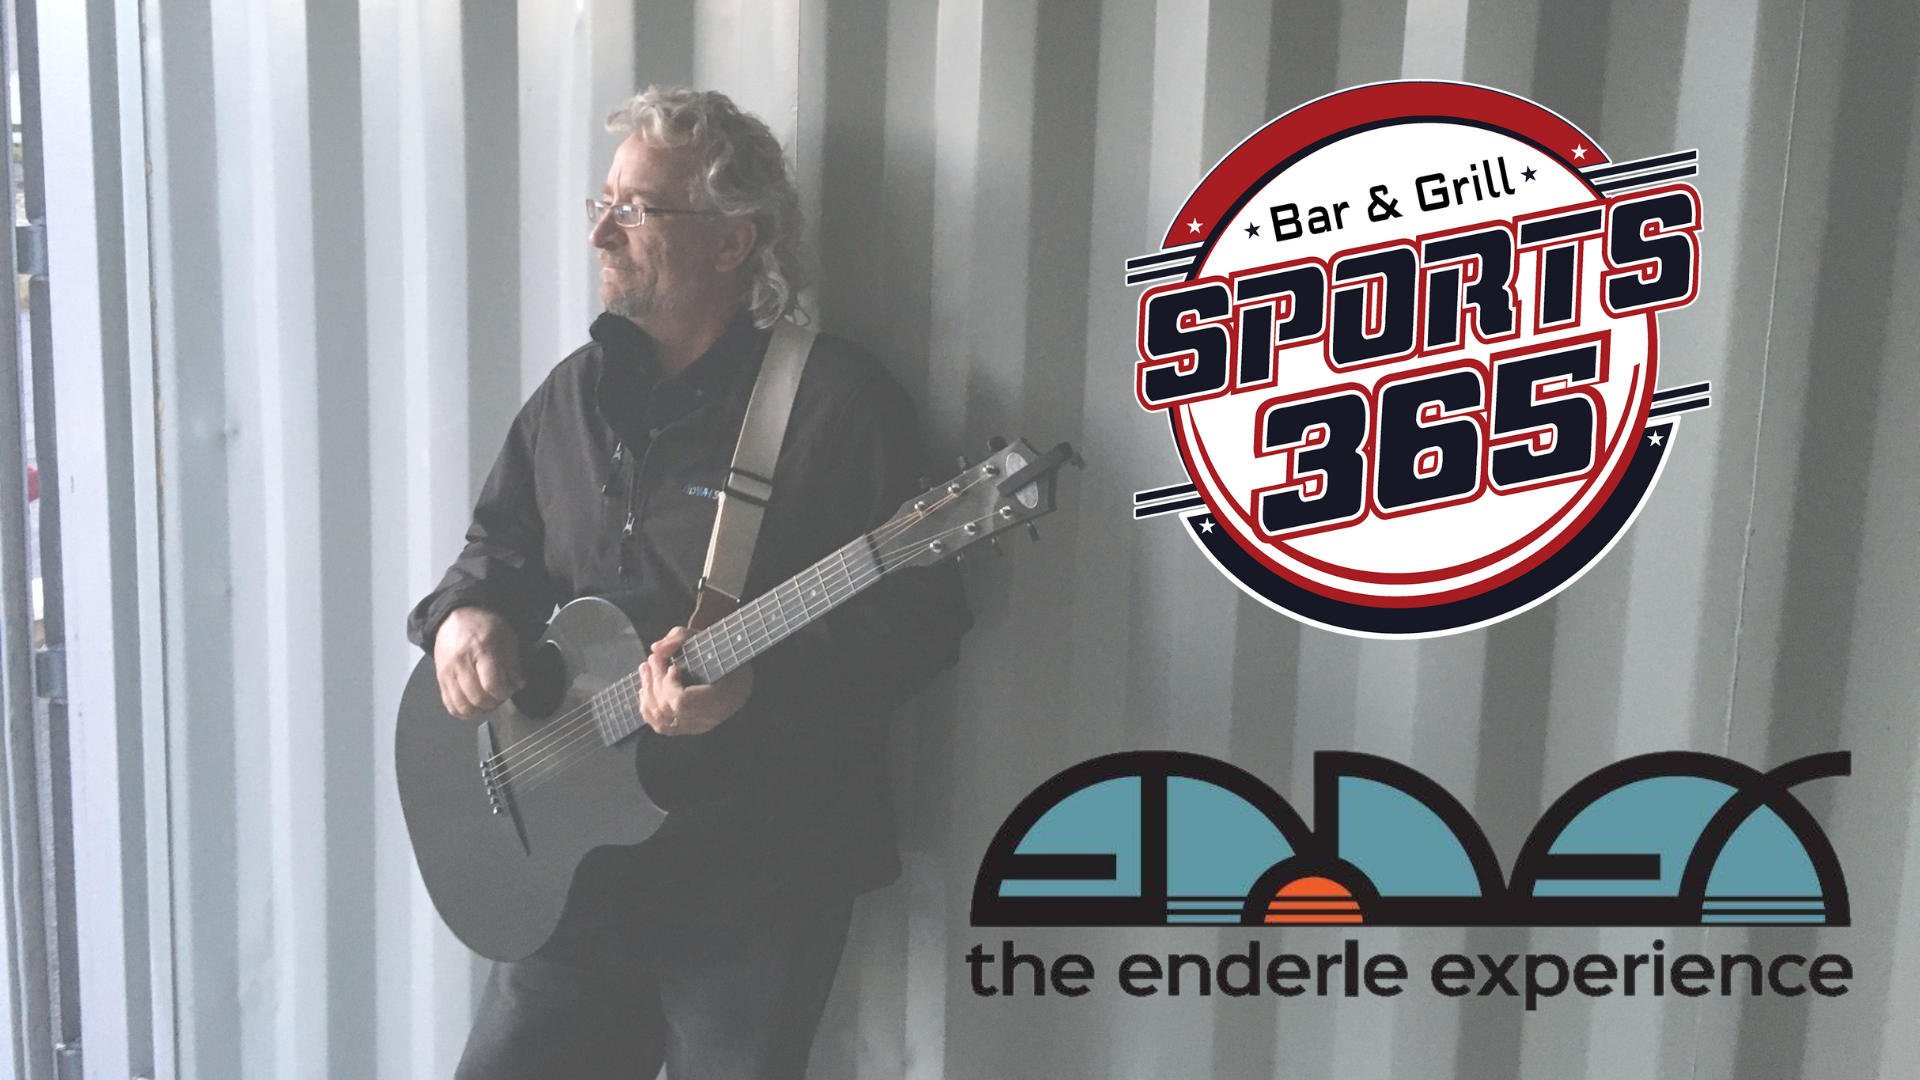 The Enderle Experience Live at Sports 365